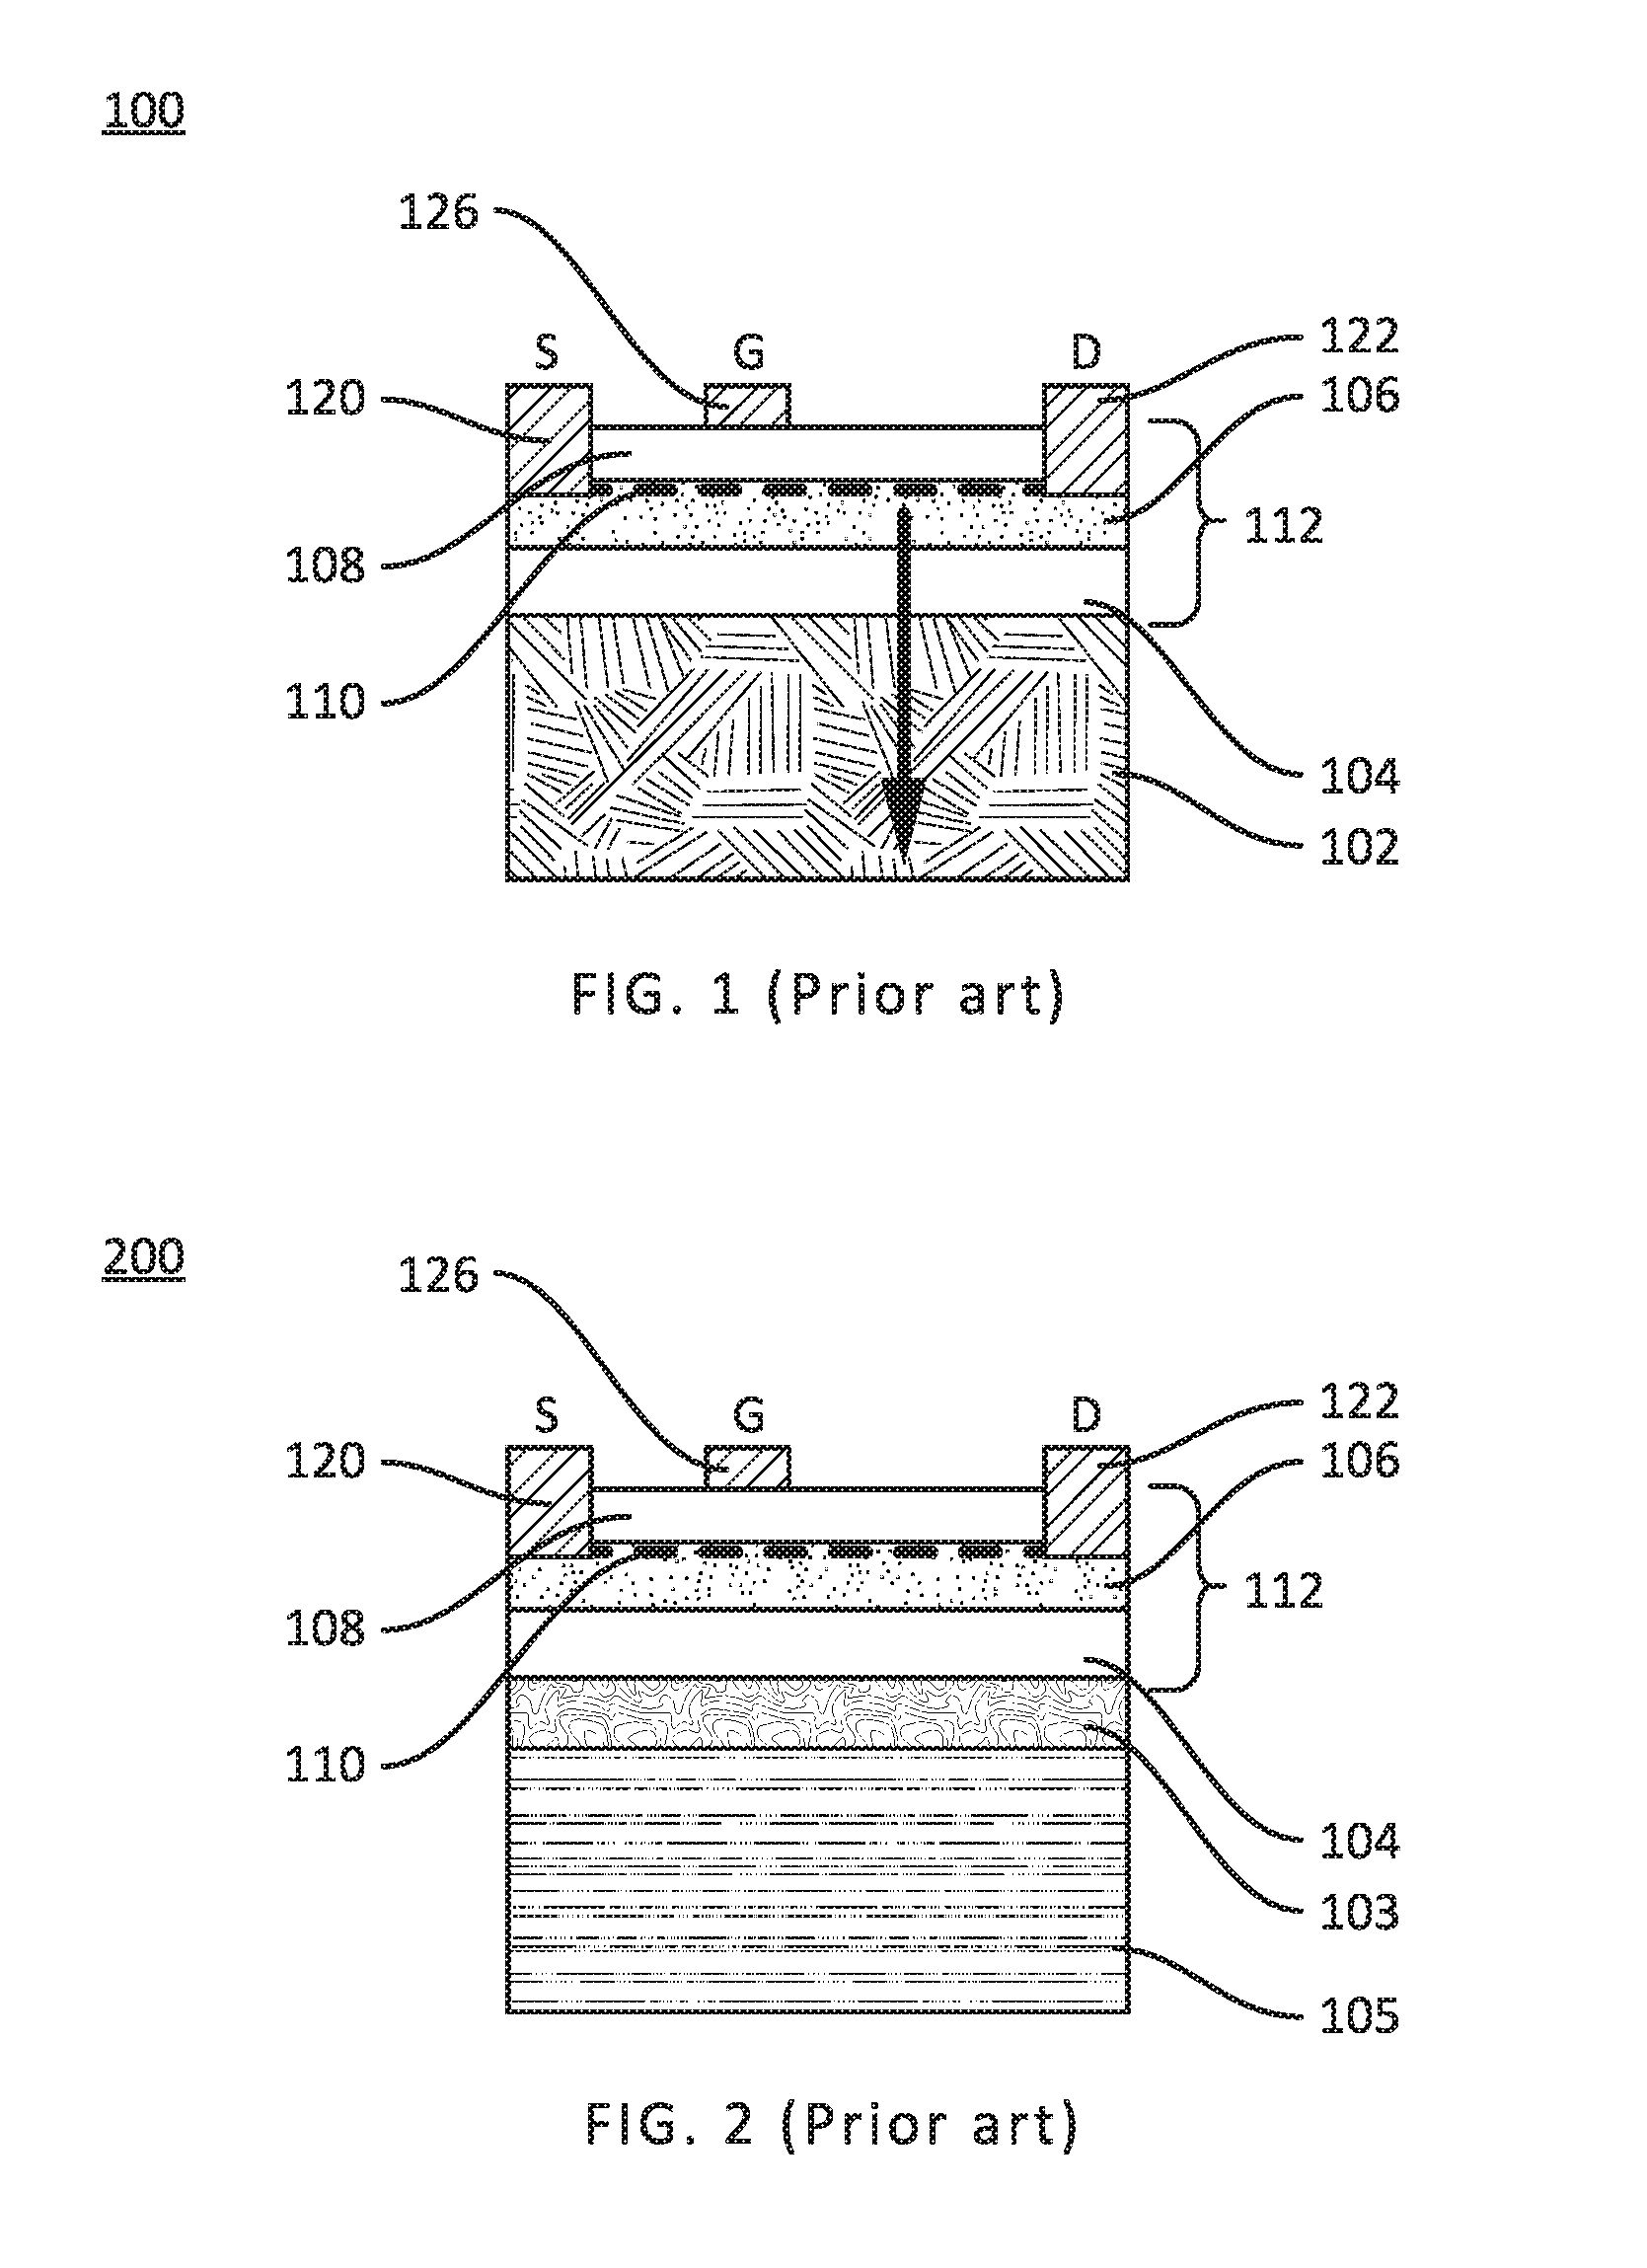 GaN SEMICONDUCTOR DEVICE STRUCTURE AND METHOD OF FABRICATION BY SUBSTRATE REPLACEMENT